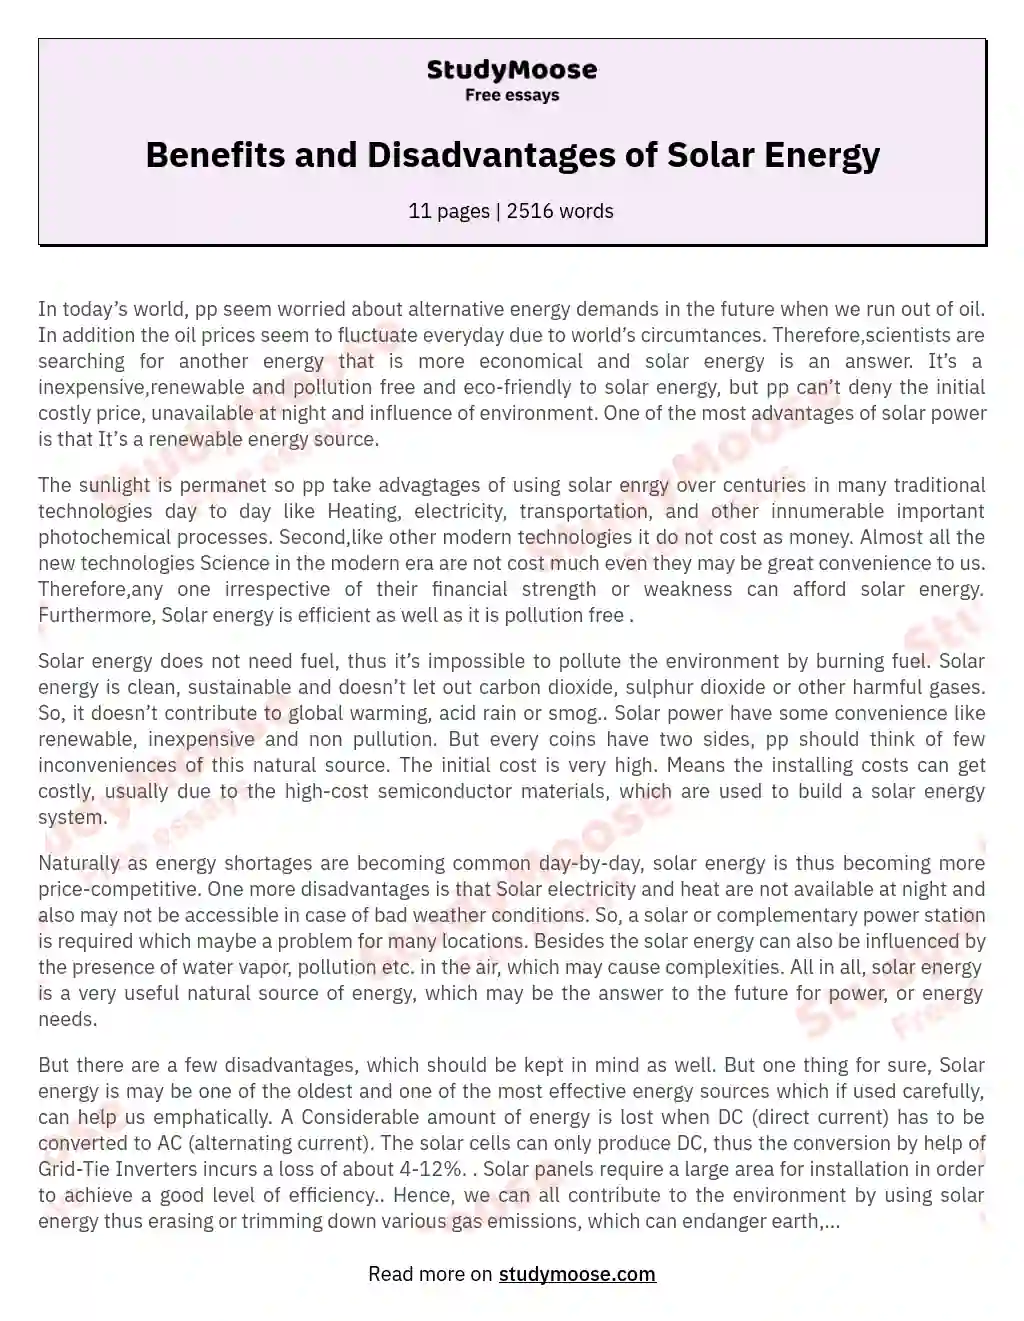 Benefits and Disadvantages of Solar Energy essay